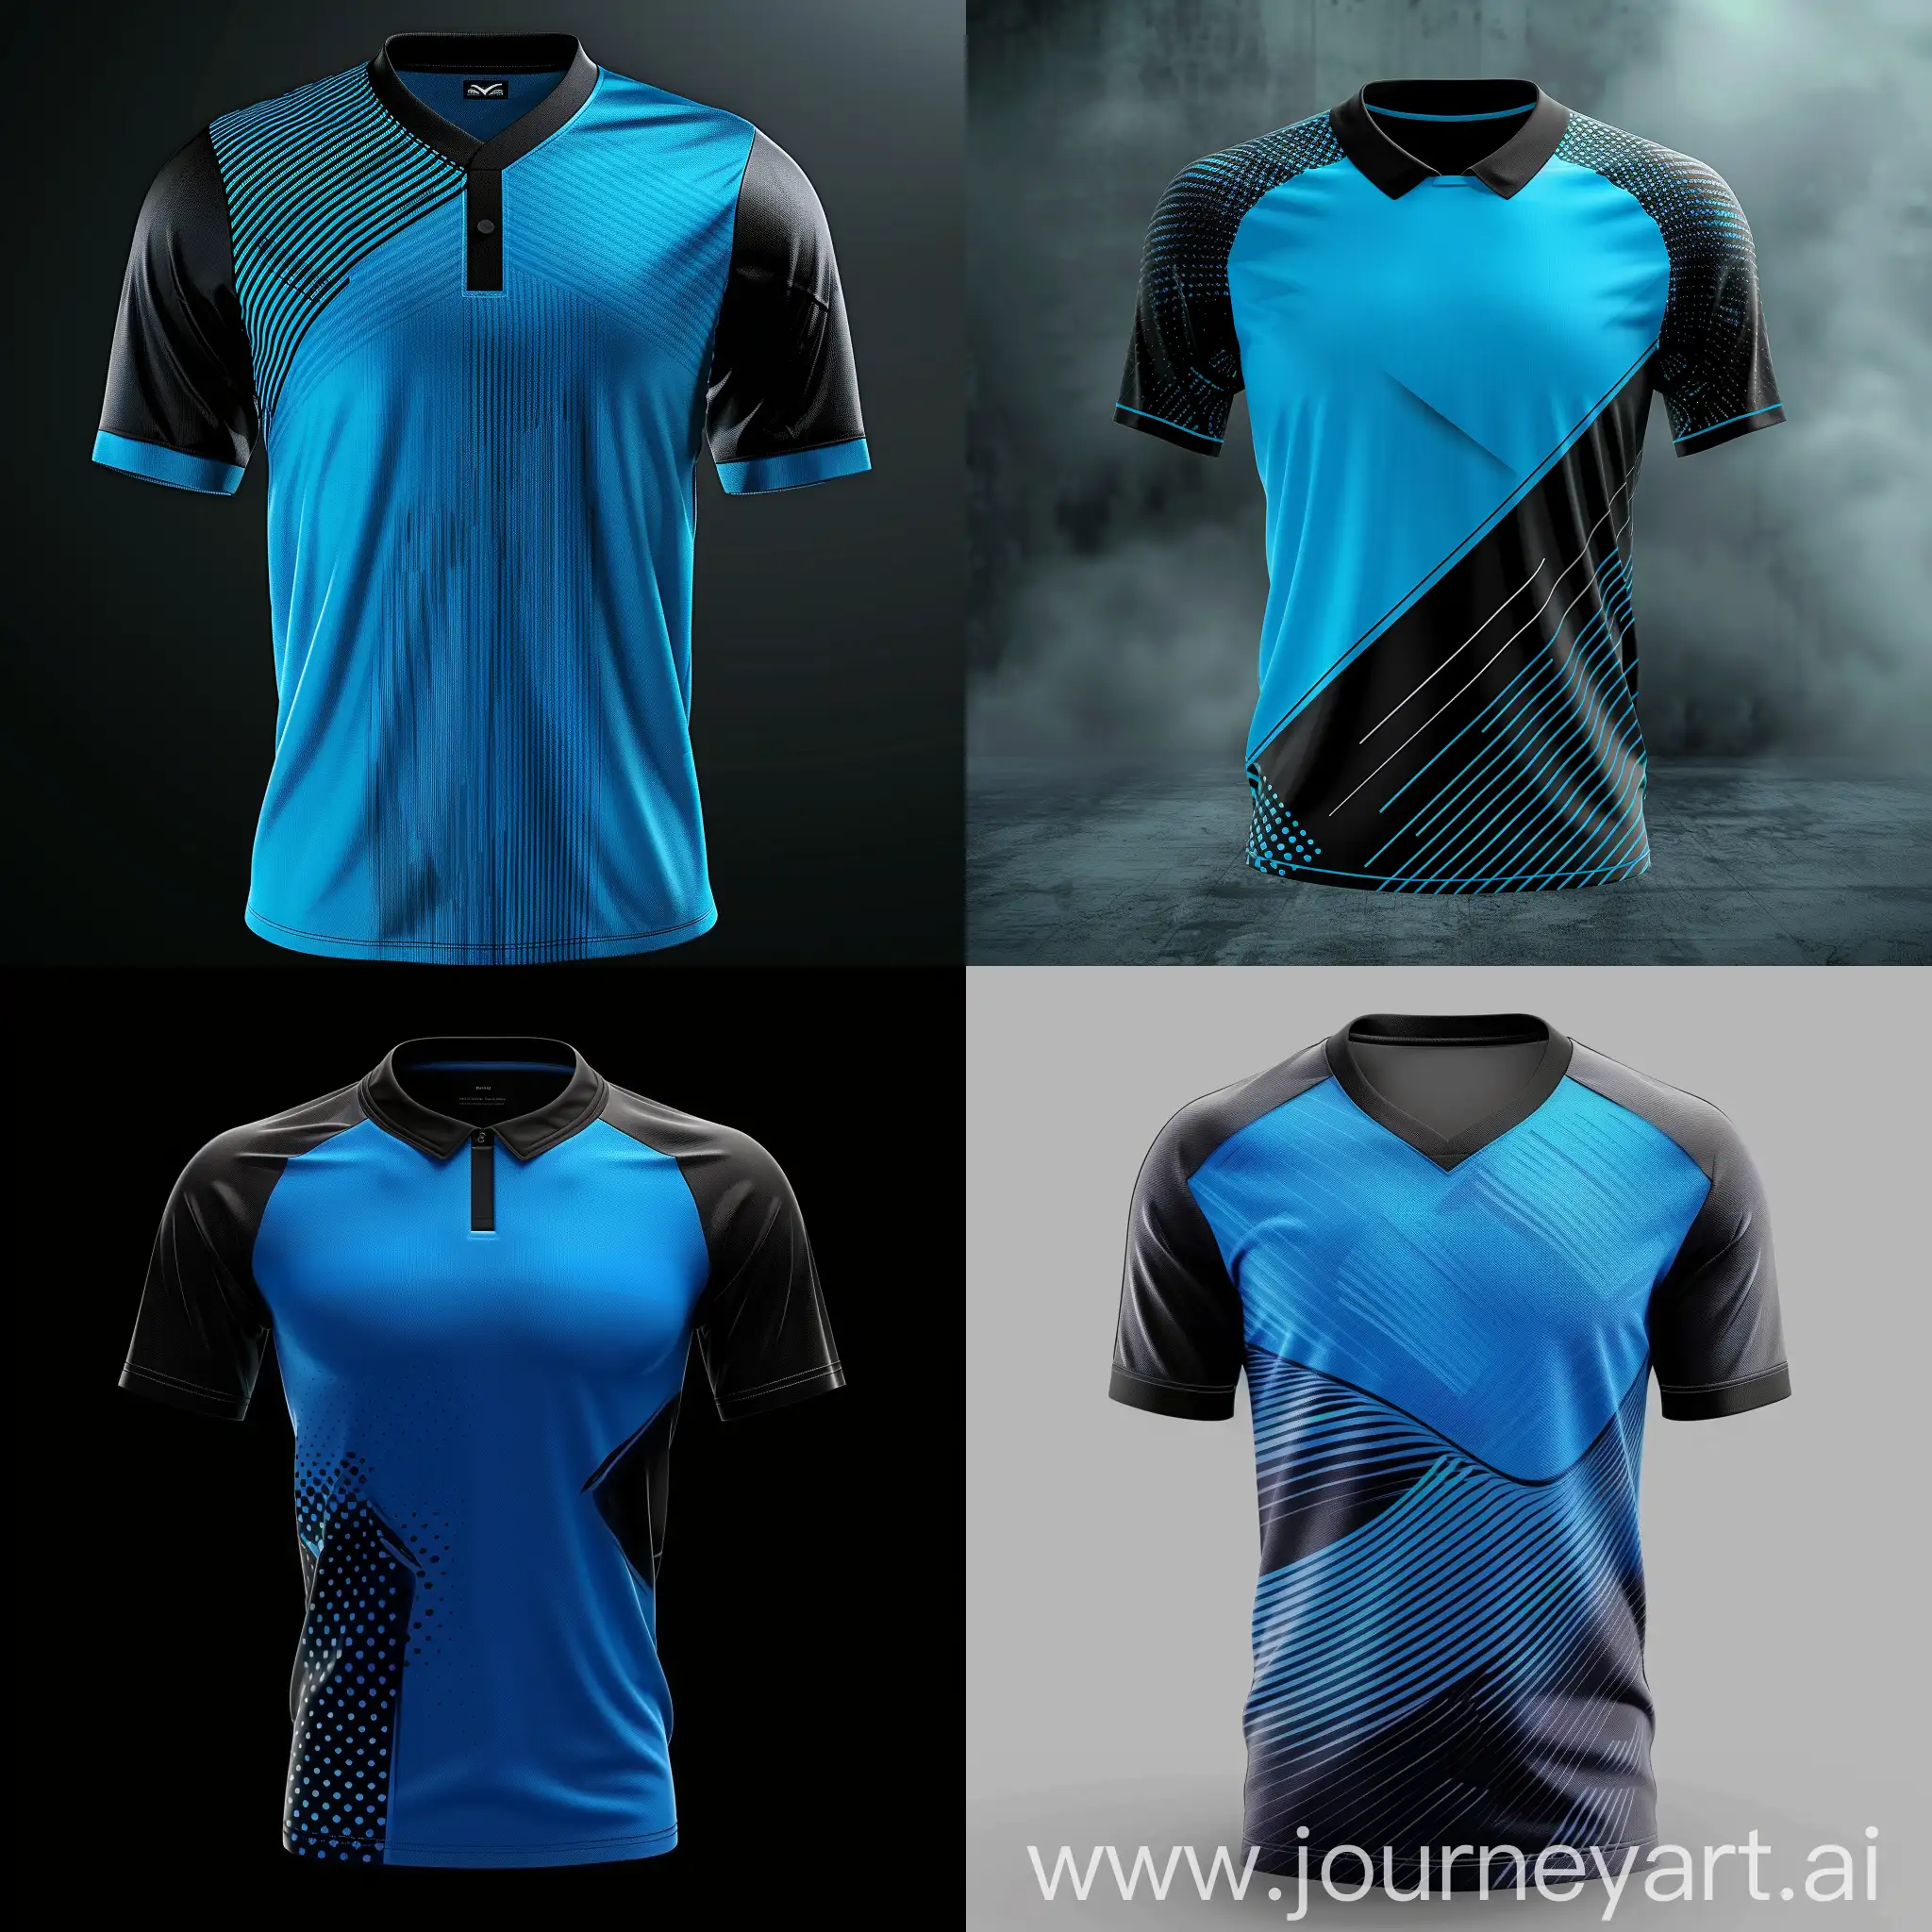 Elegant-3D-Soccer-Jersey-Design-in-Blue-and-Black-with-Intricate-Motifs